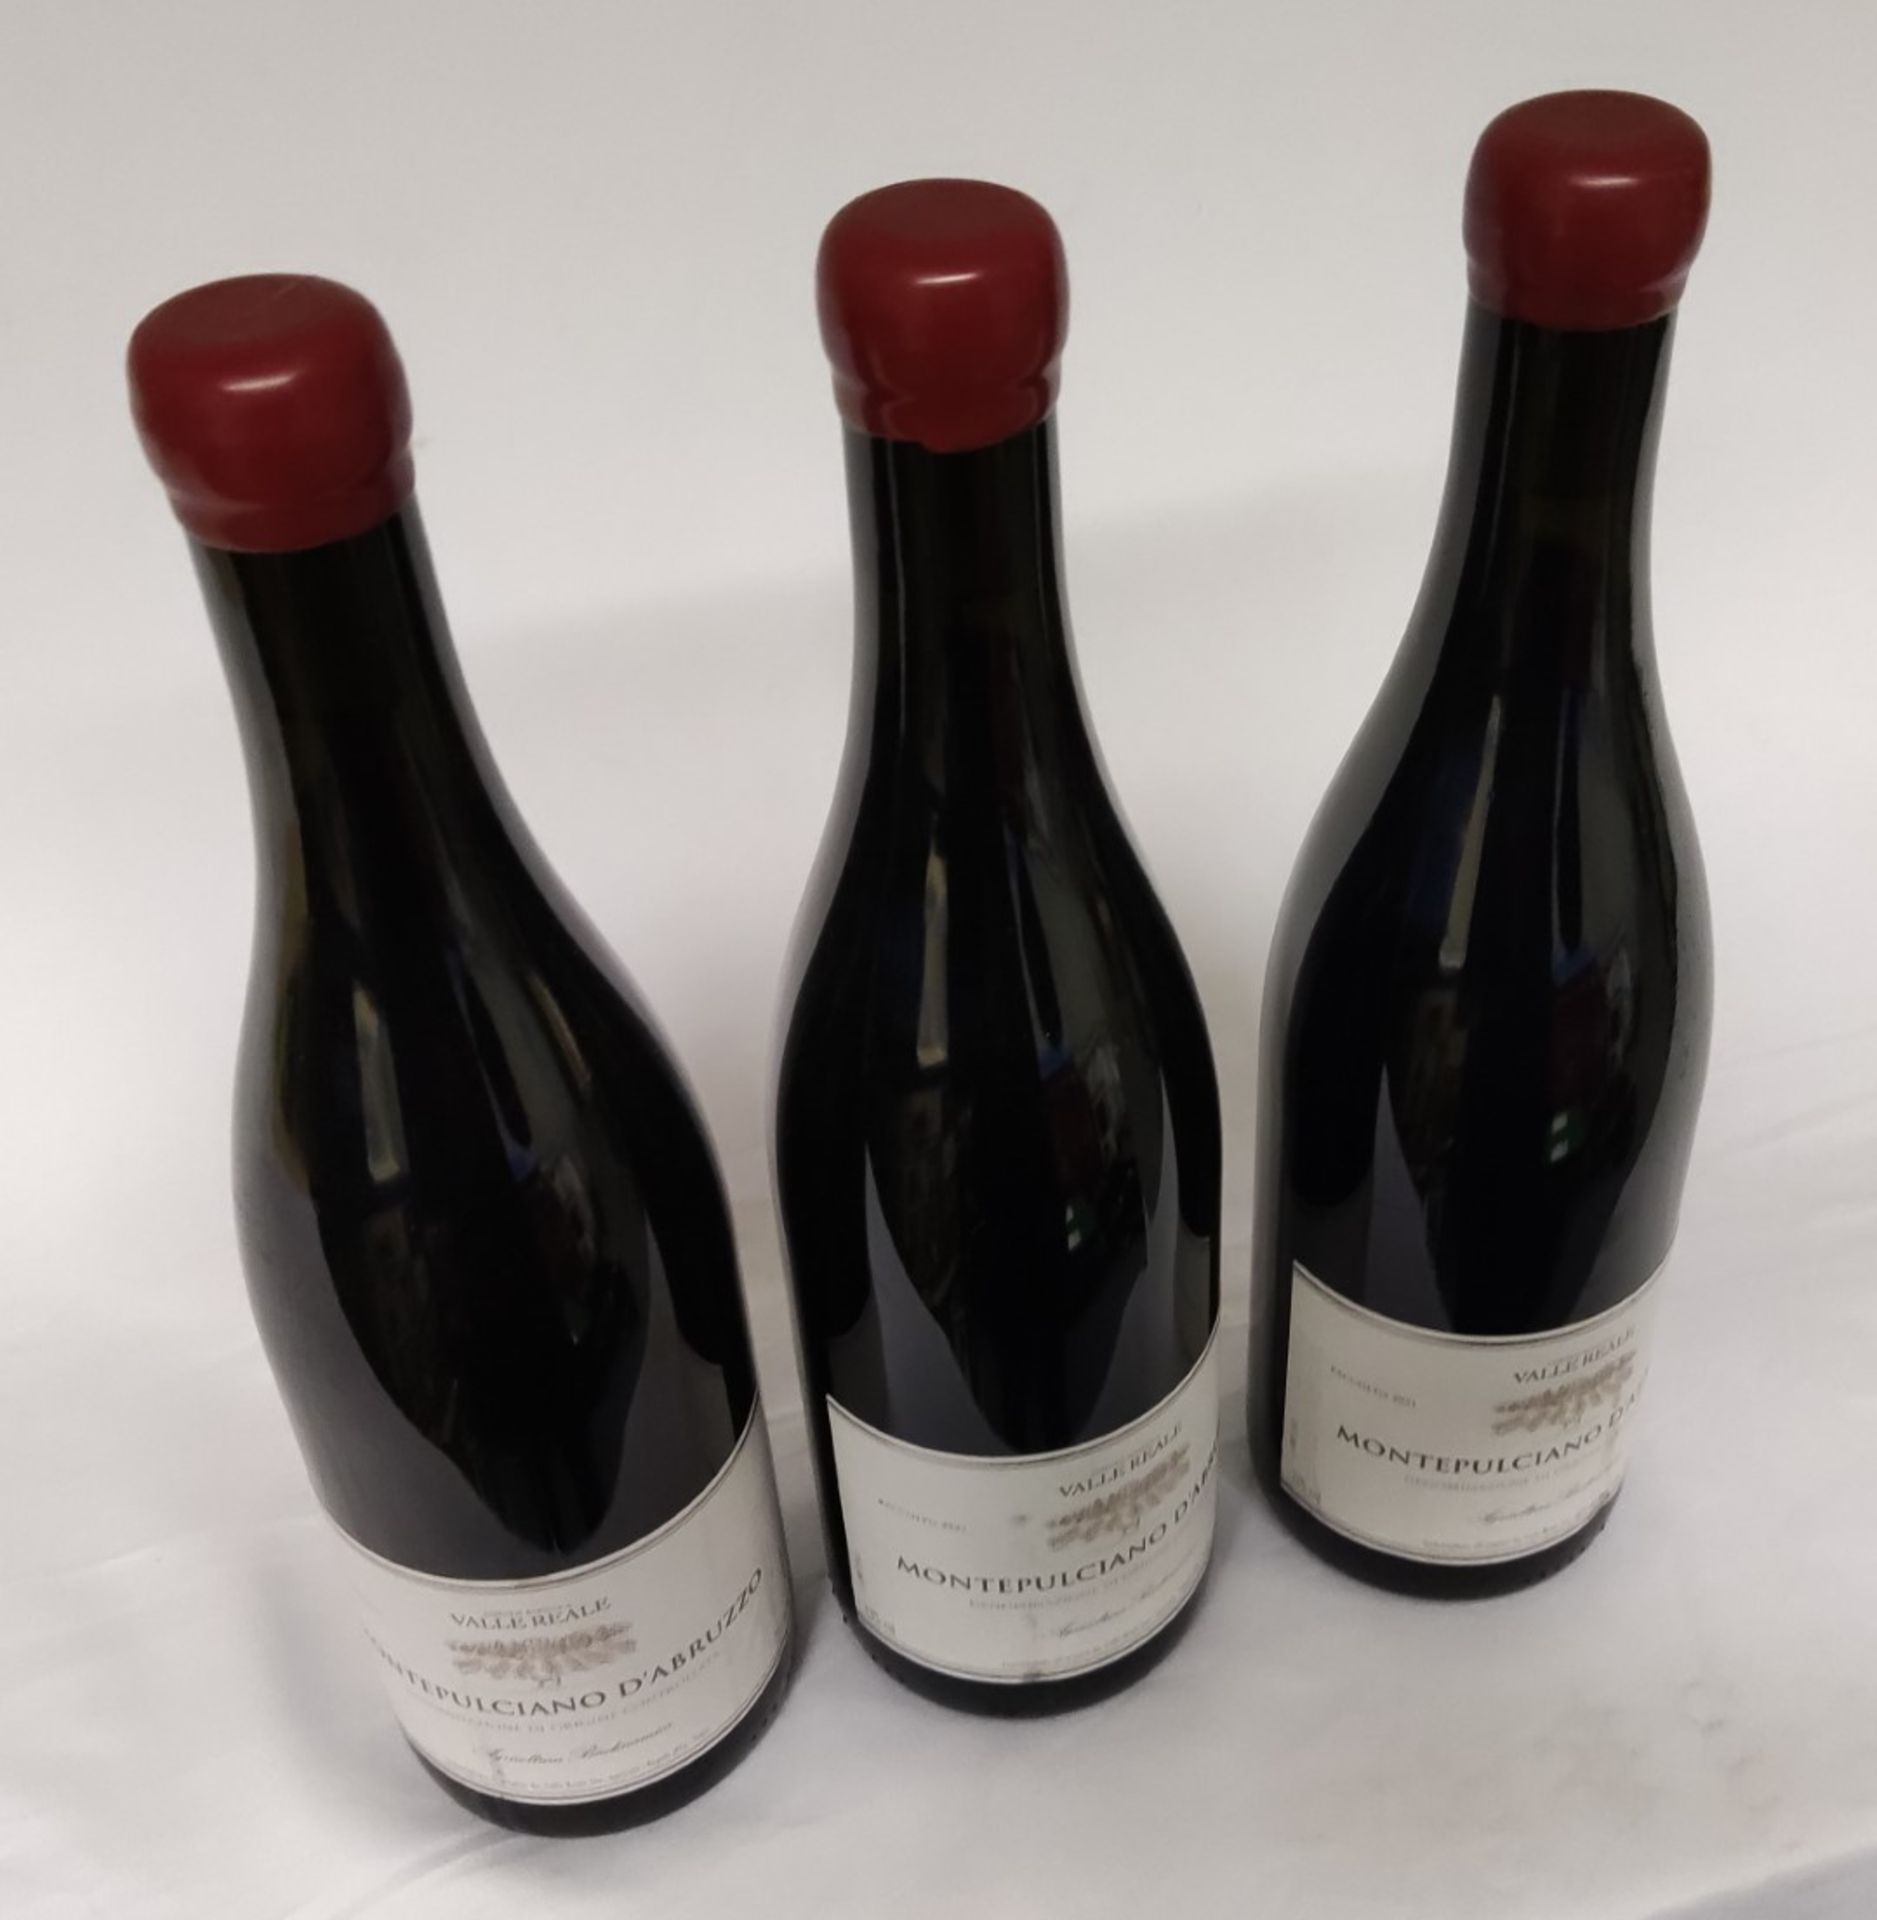 3 x Bottles of 2021 Valle Reale Montepulciano D'Abruzzo Red Wine - RRP £60 - Image 4 of 11